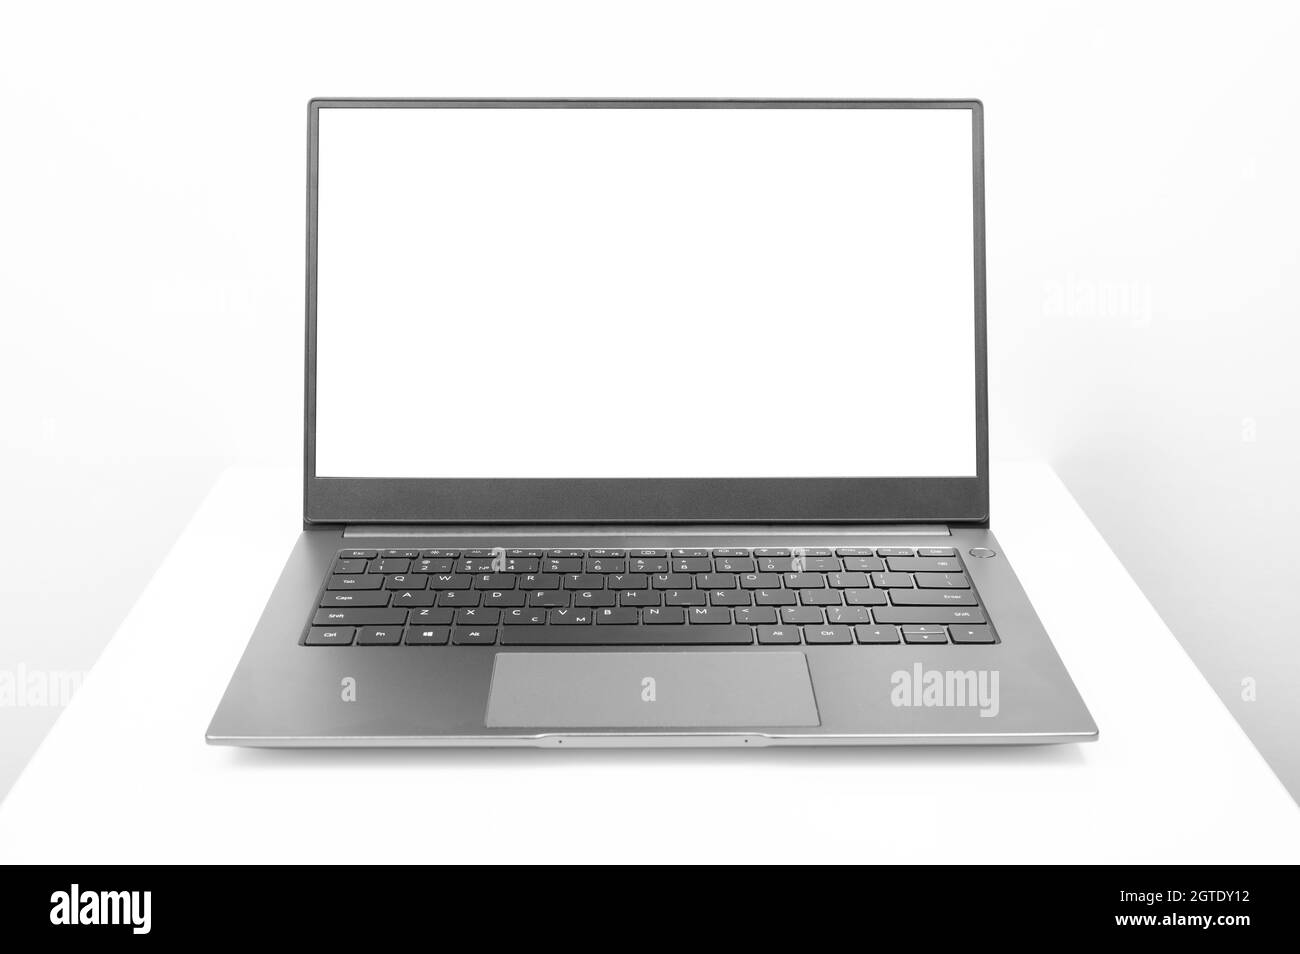 Mockup image of open laptop computer with white blank screen. Modern silver laptop with blank screen on white background Stock Photo